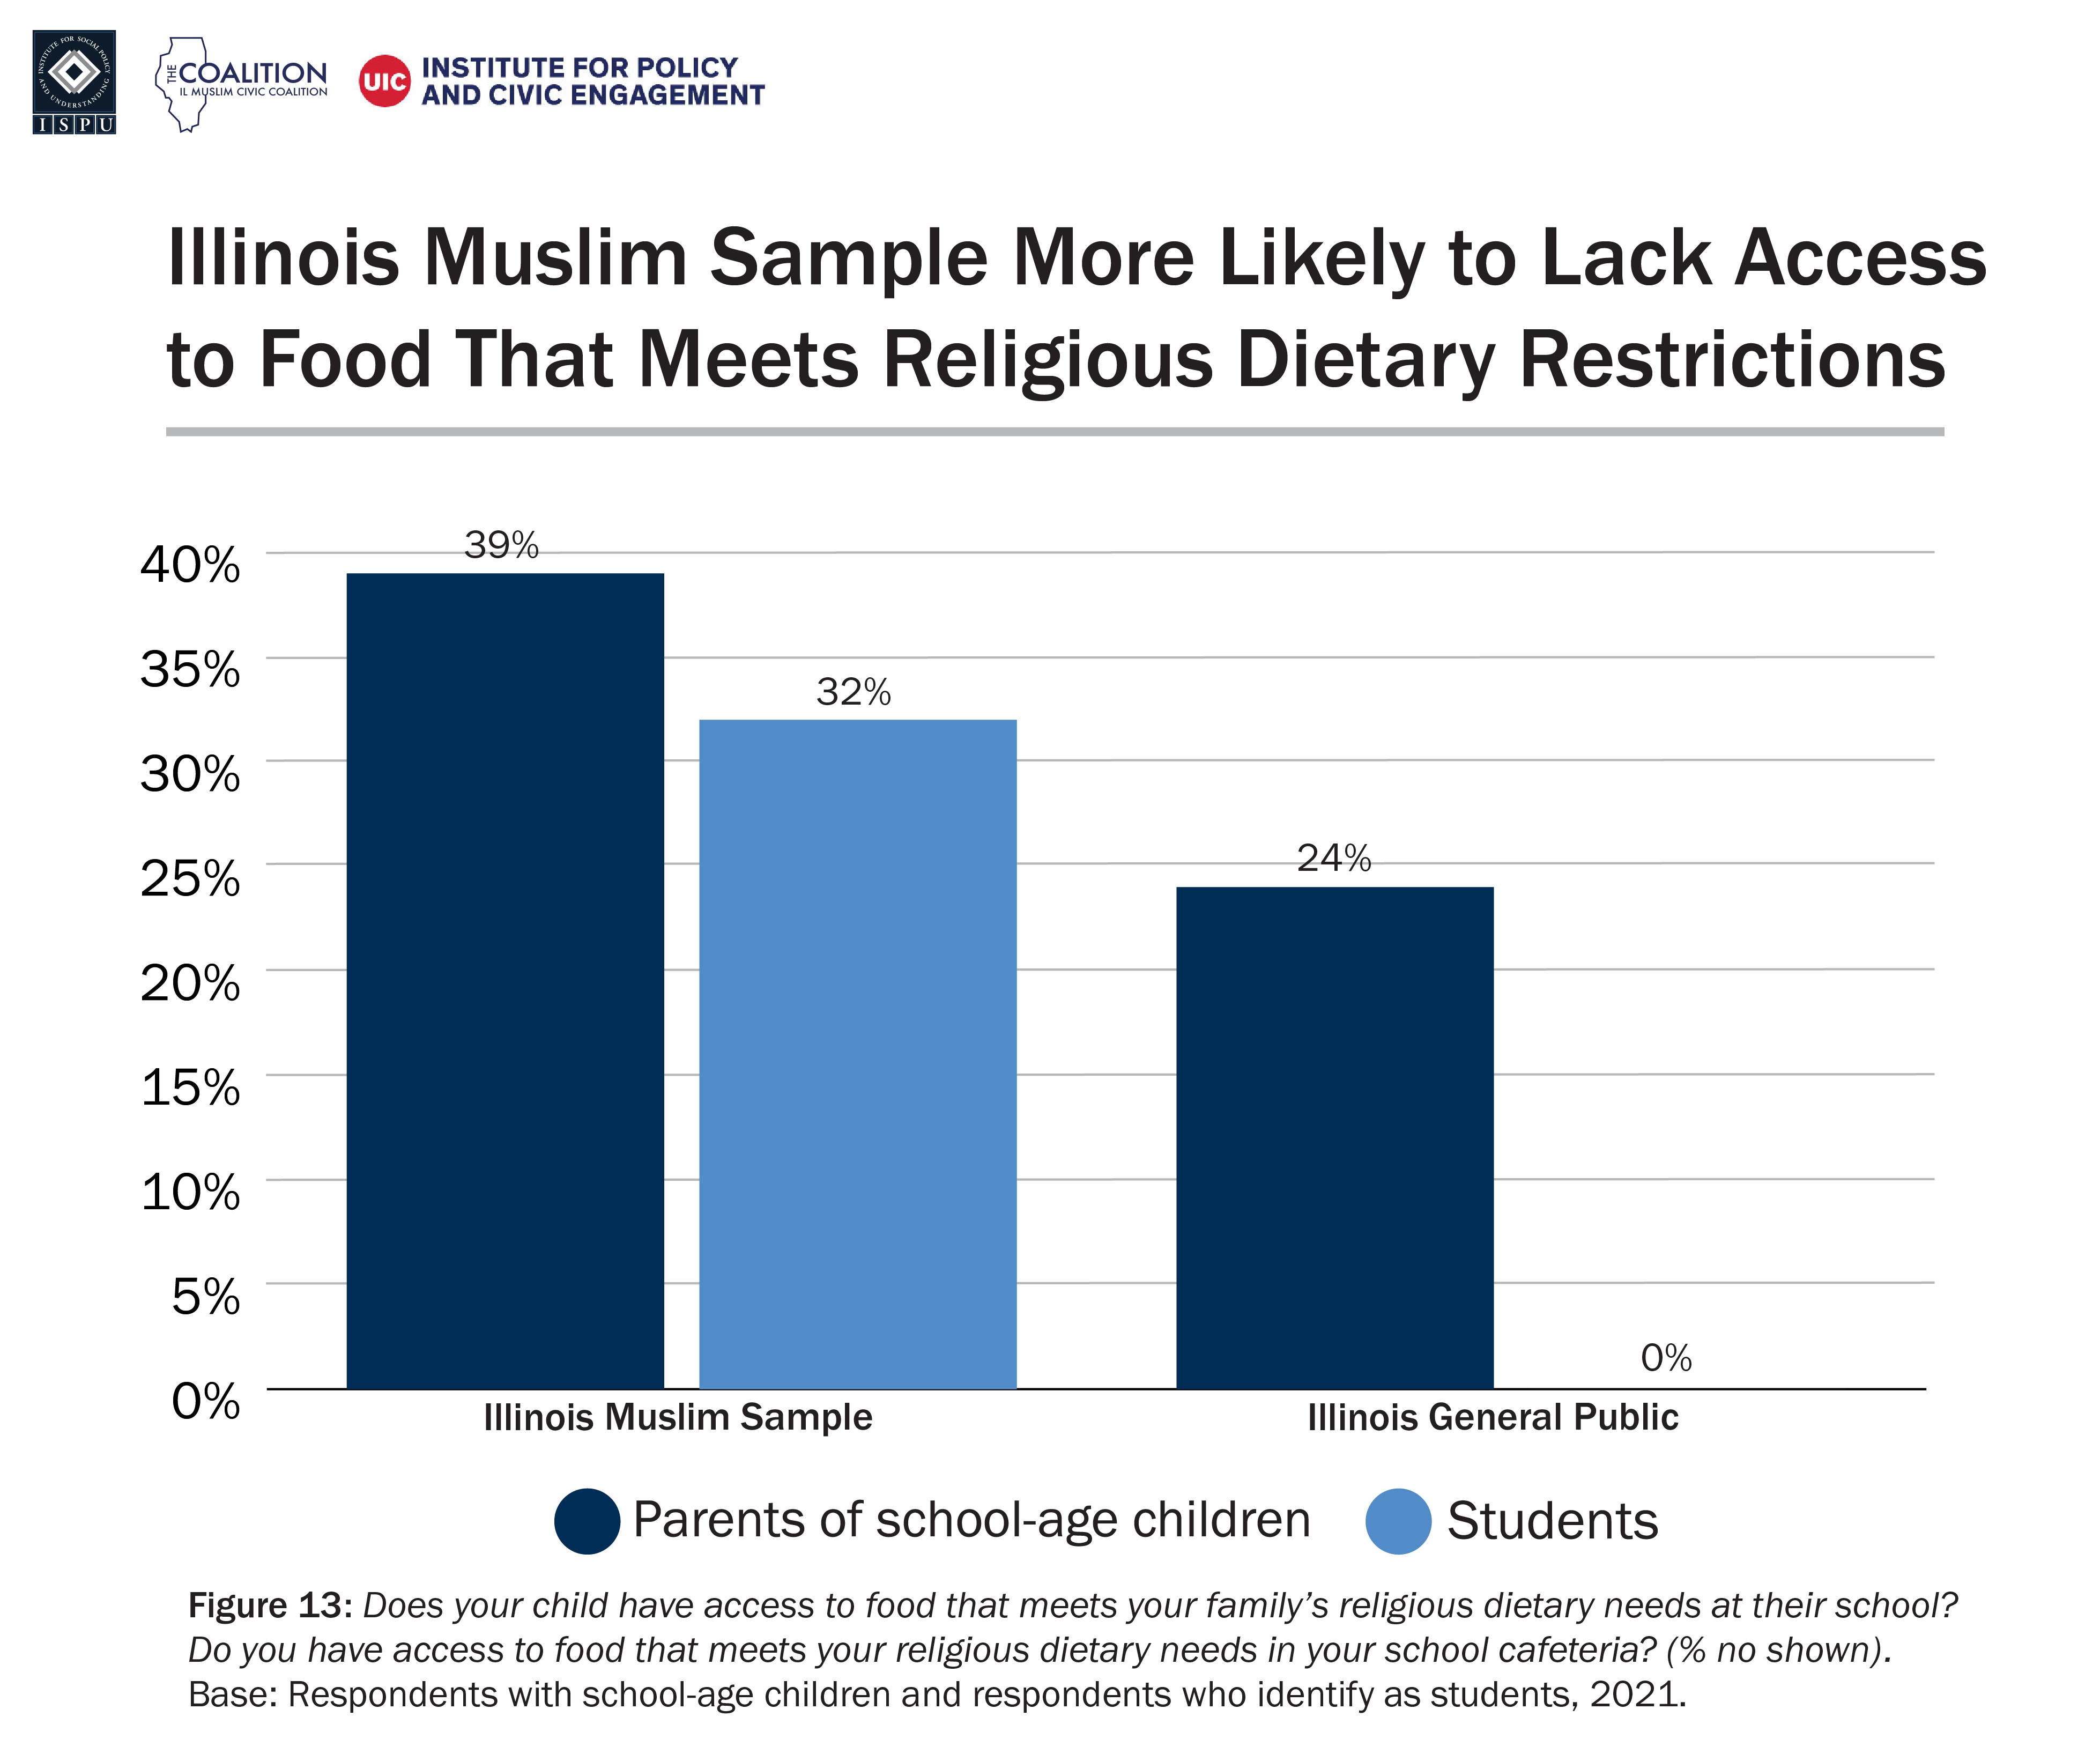 A bar graph showing the percent of Illinois Muslim sample and Illinois general public who lack access to food that meets religious dietary restrictions in school settings